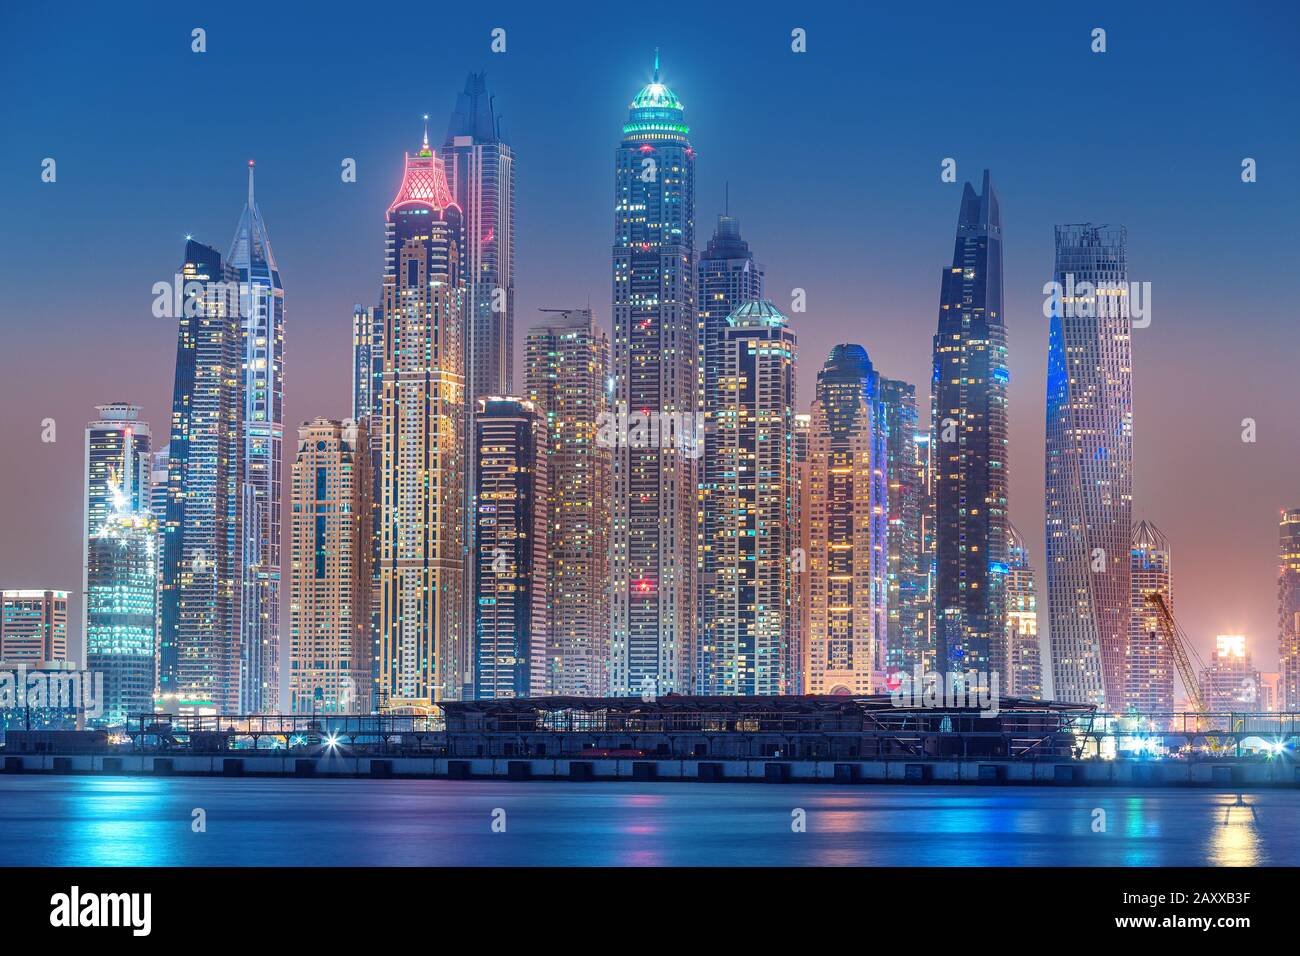 Majestic city view of skyscrapers and hotel buildings in the Dubai Marina area from the palm Jumeirah island in Dubai. Real estate and tourist attract Stock Photo